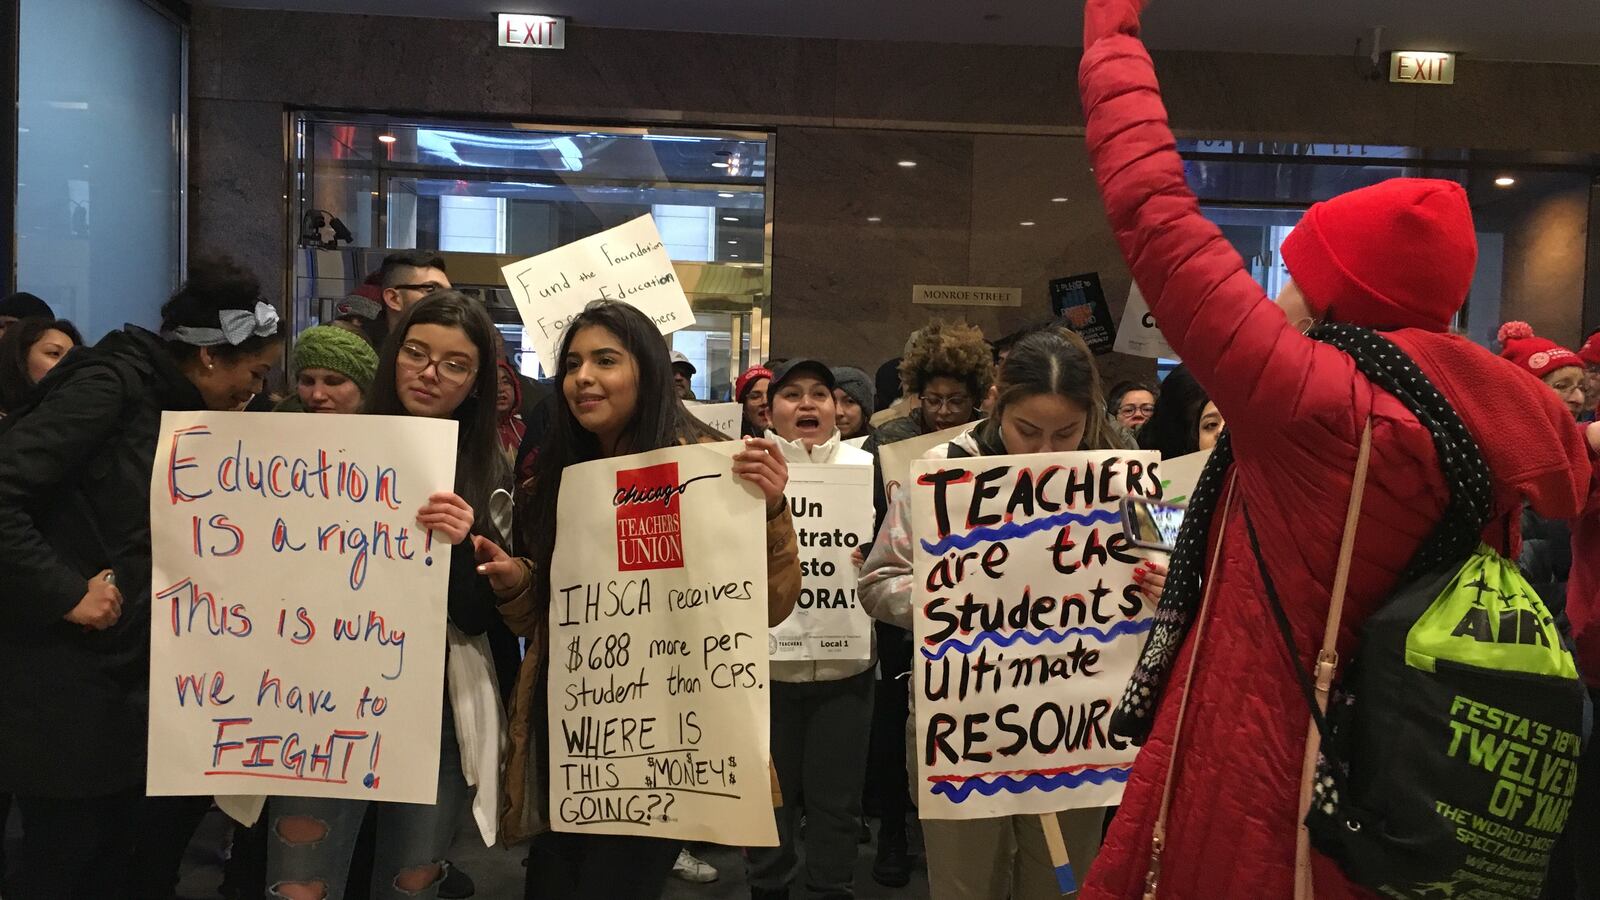 Teachers and students stand in the lobby of a building where their network is holding a board meeting.